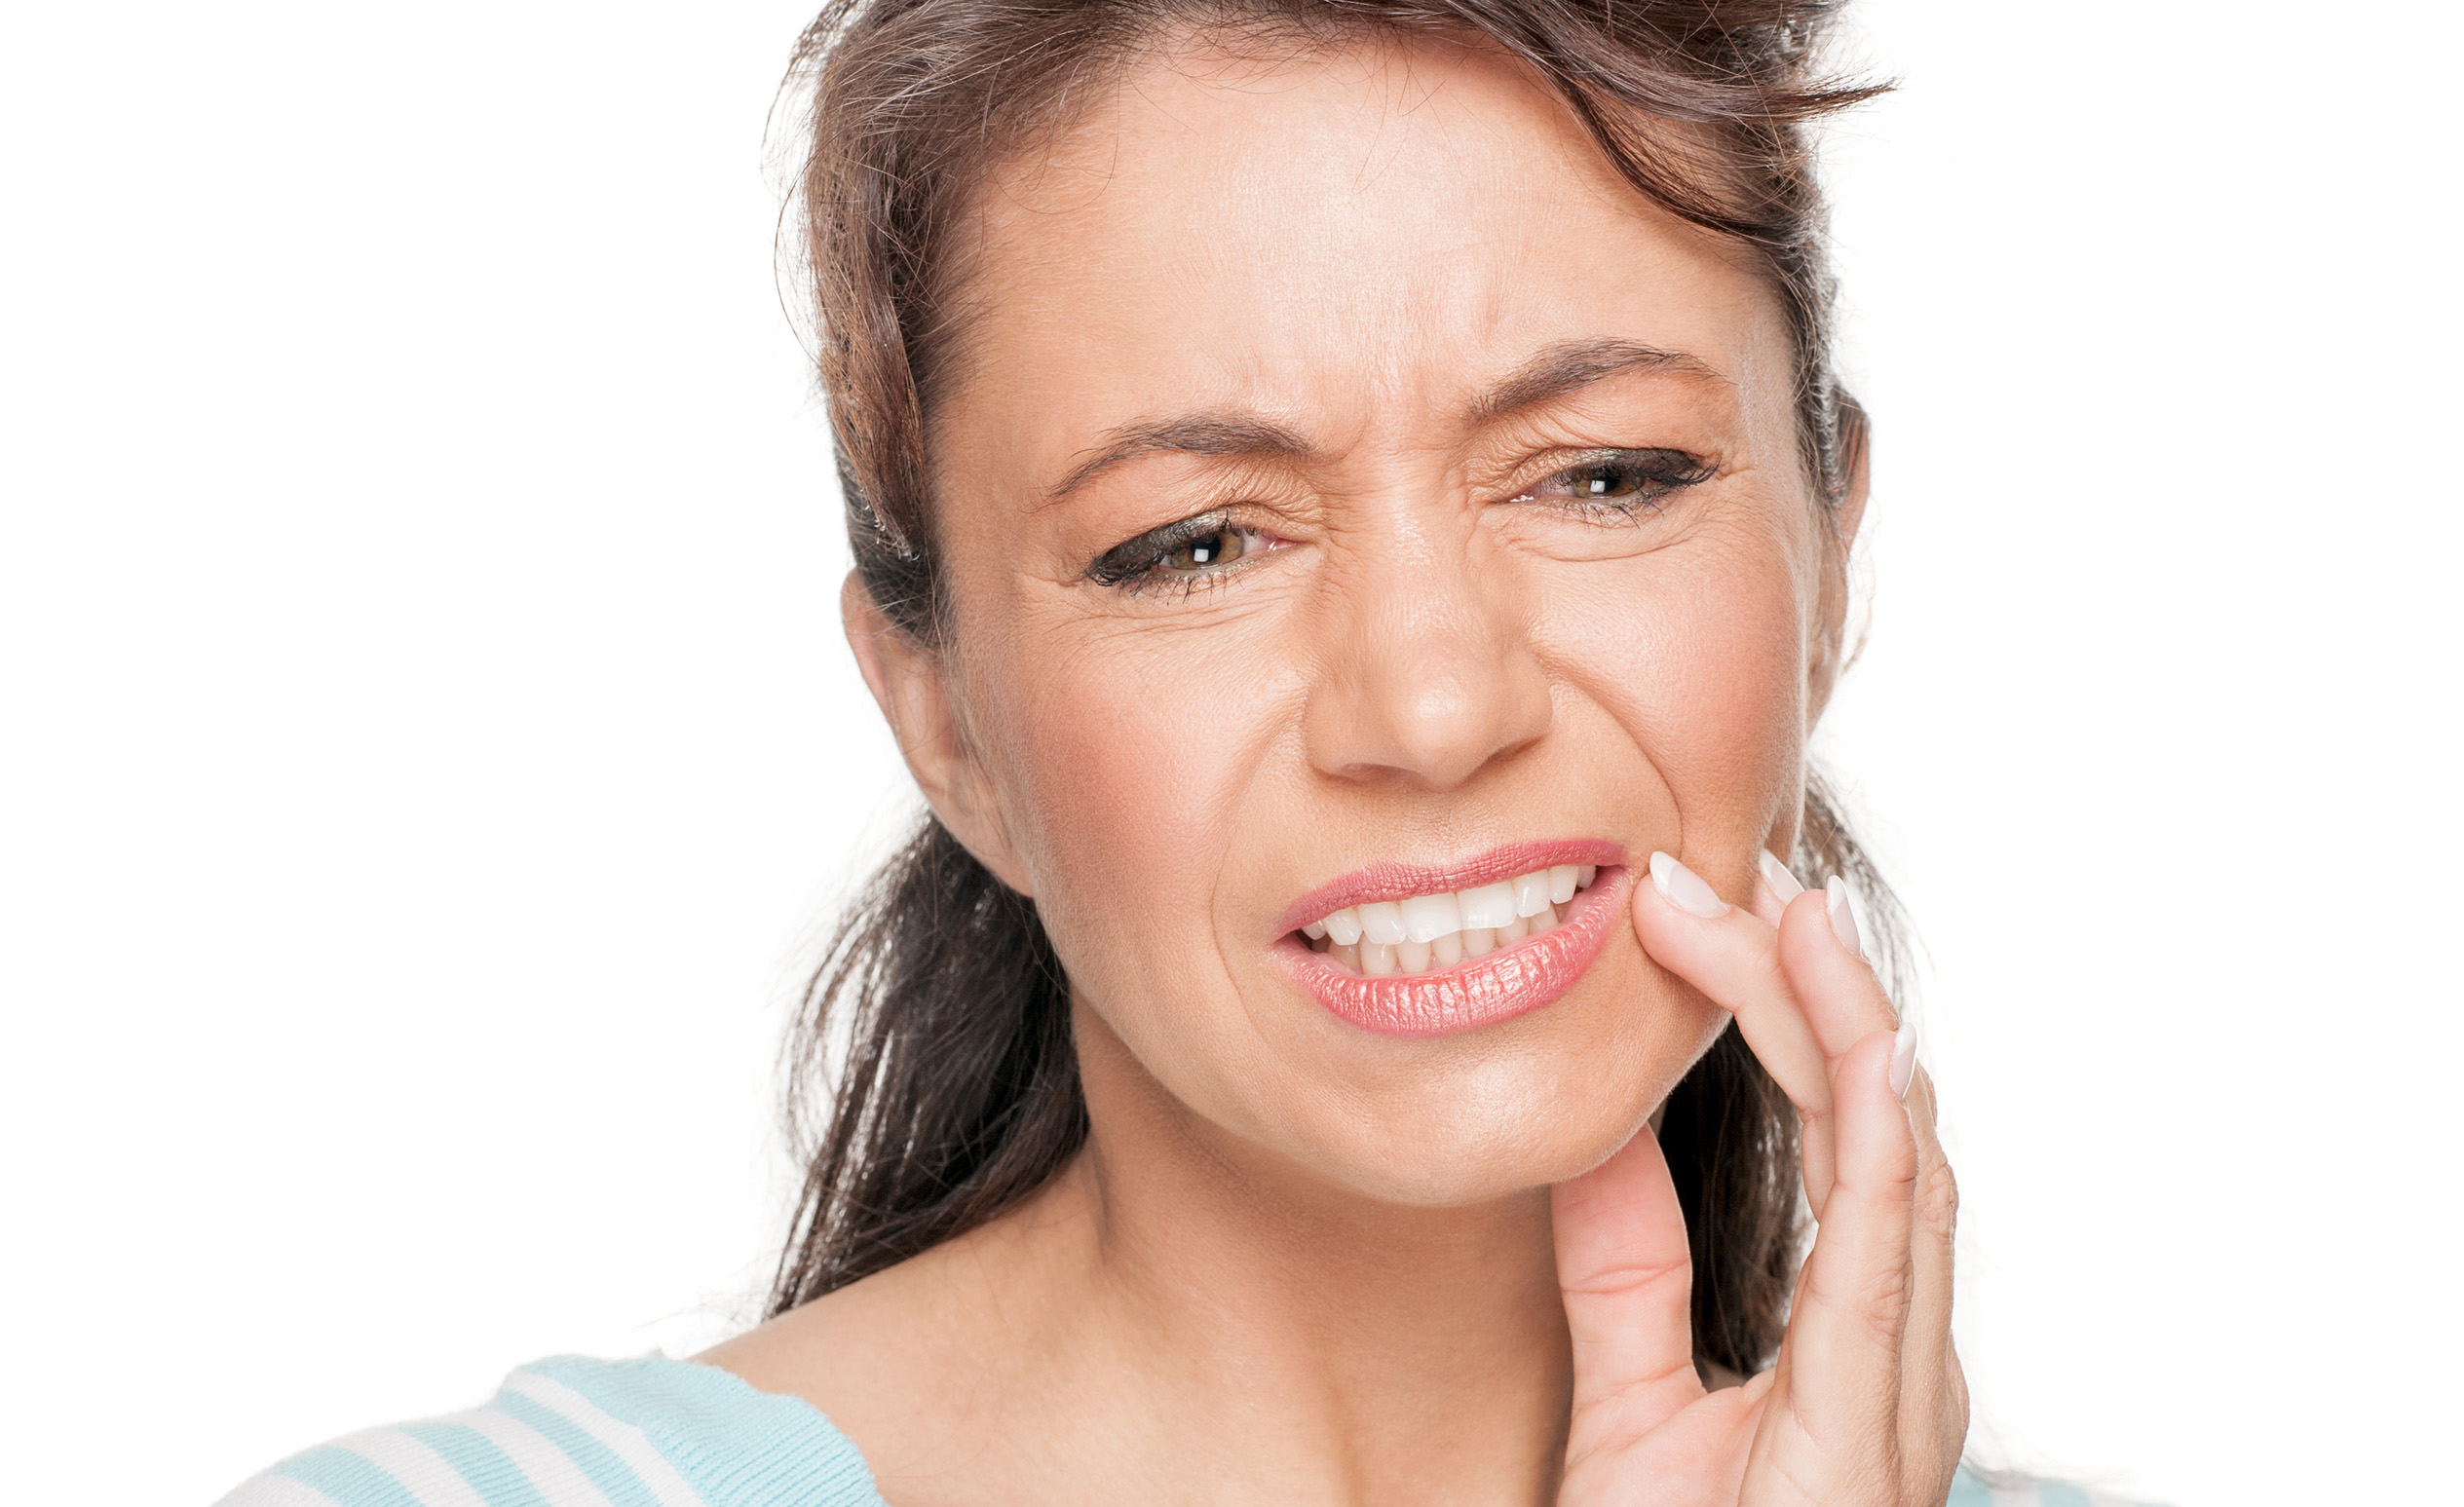 This woman touches her face because she got a very strong toothache.